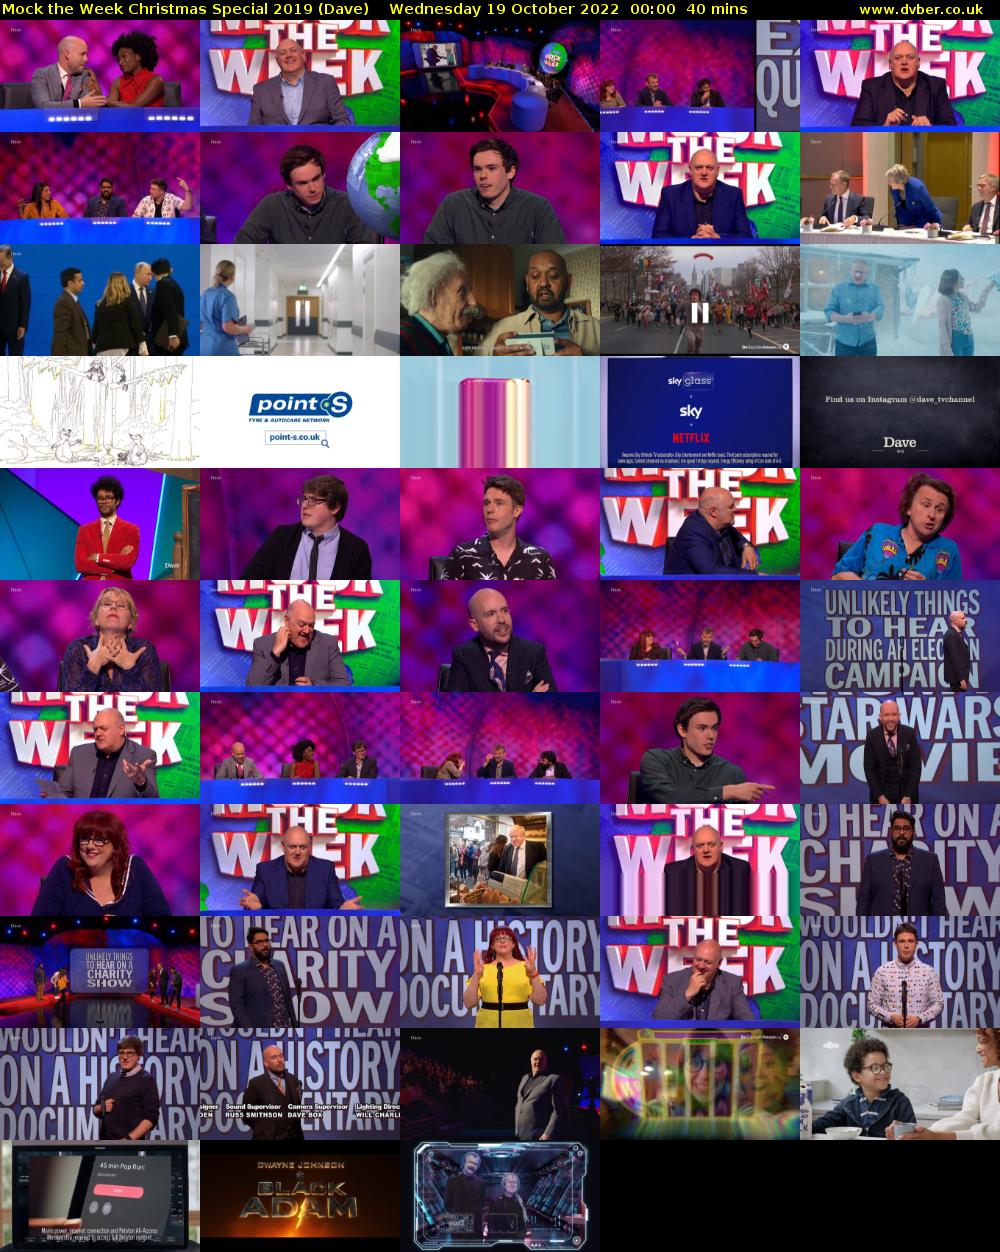 Mock the Week Christmas Special 2019 (Dave) Wednesday 19 October 2022 00:00 - 00:40